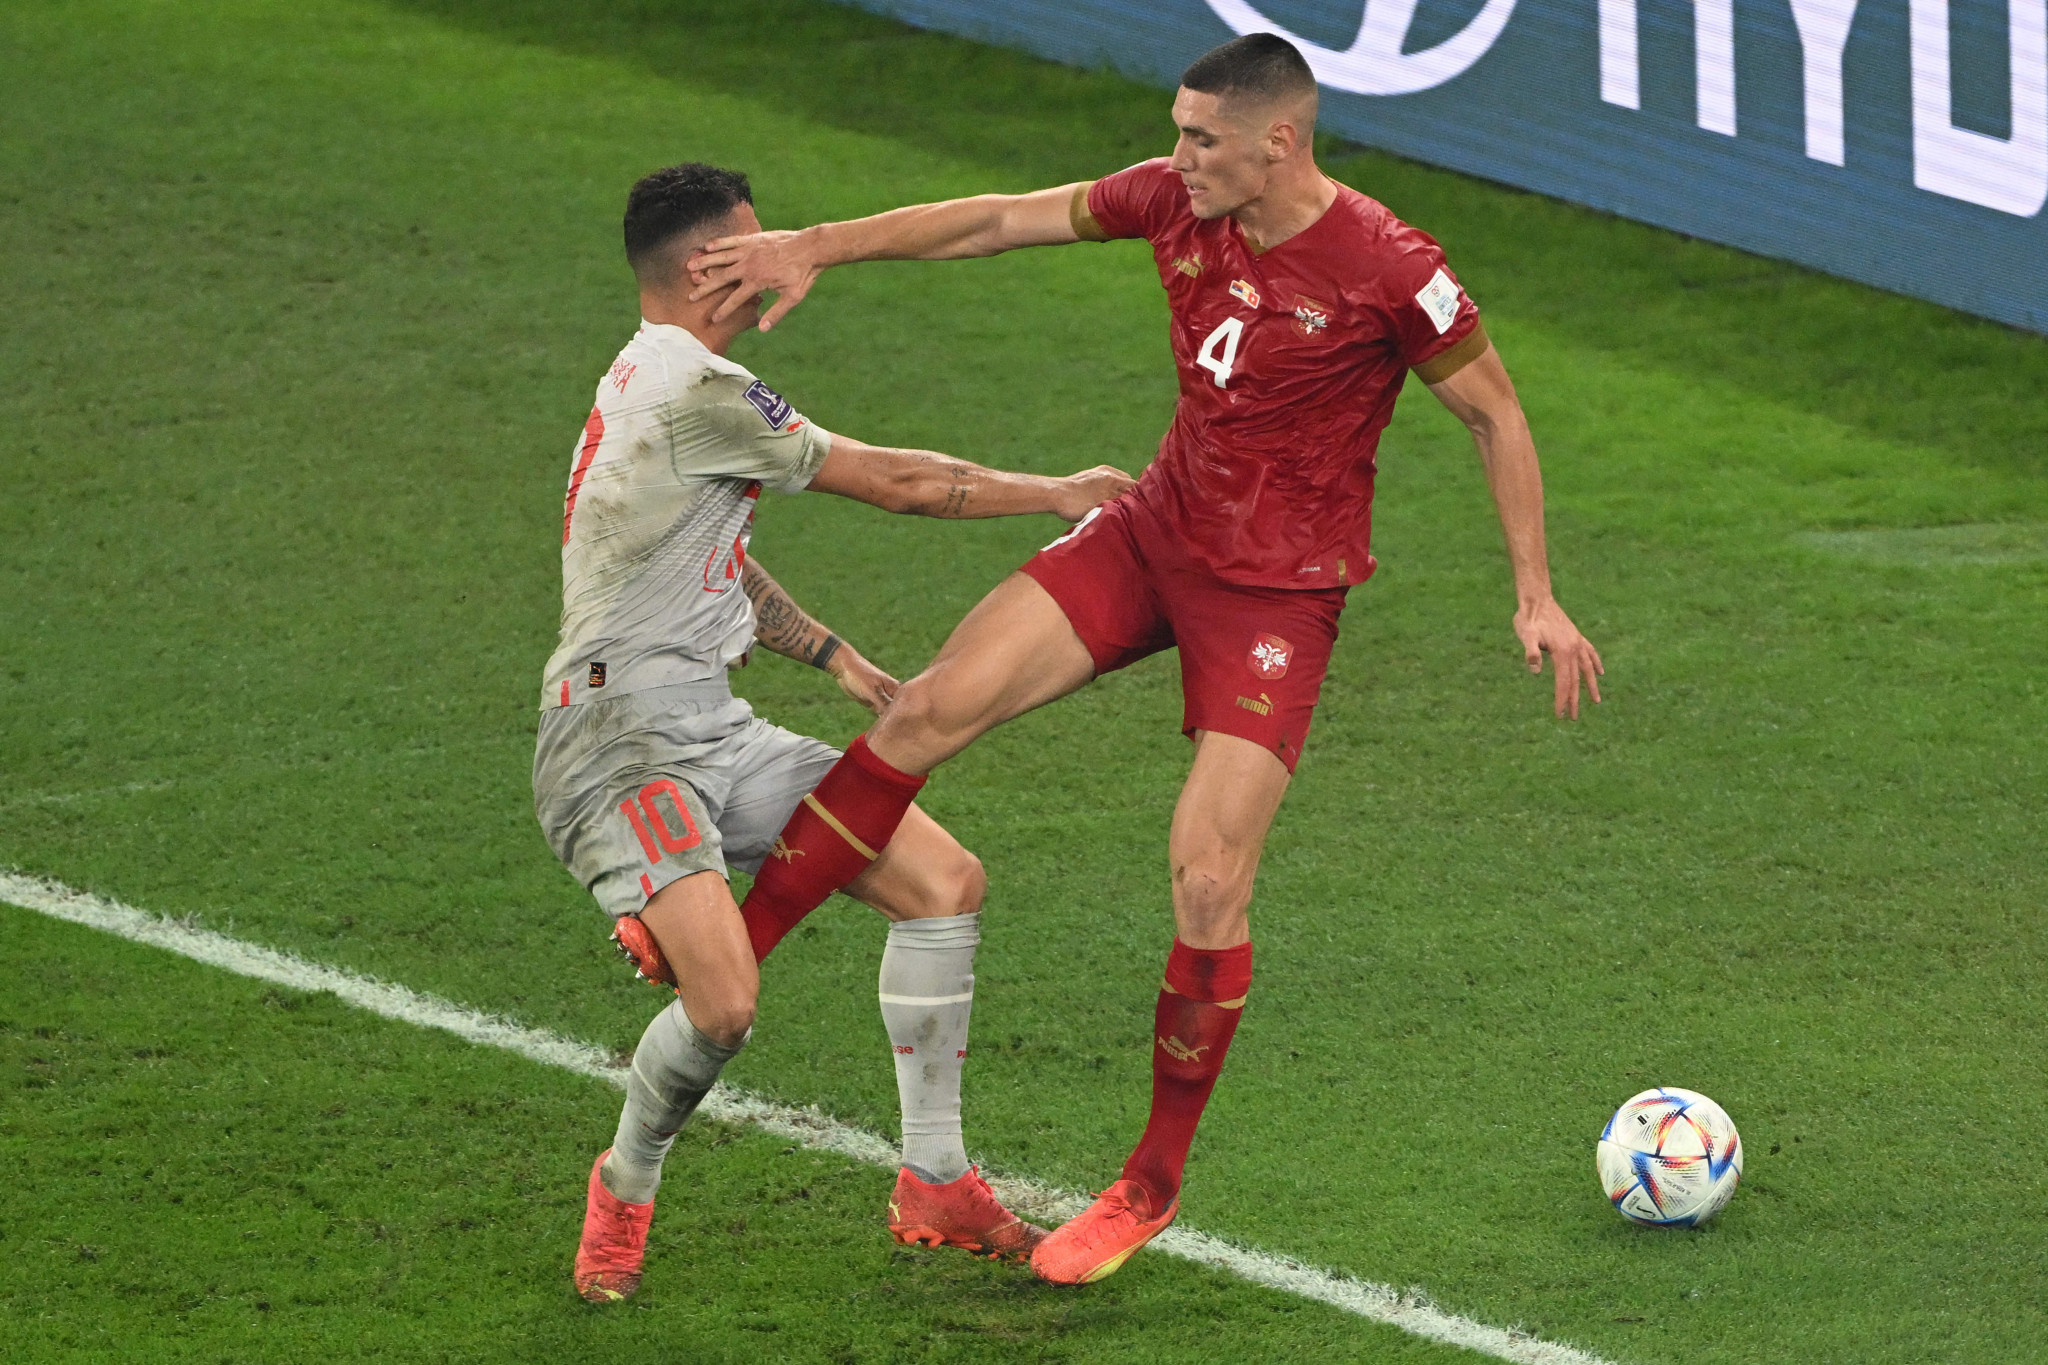 Granit Xhaka and Nikola Milenkovic clashing in the final minutes of the game ©Getty Images